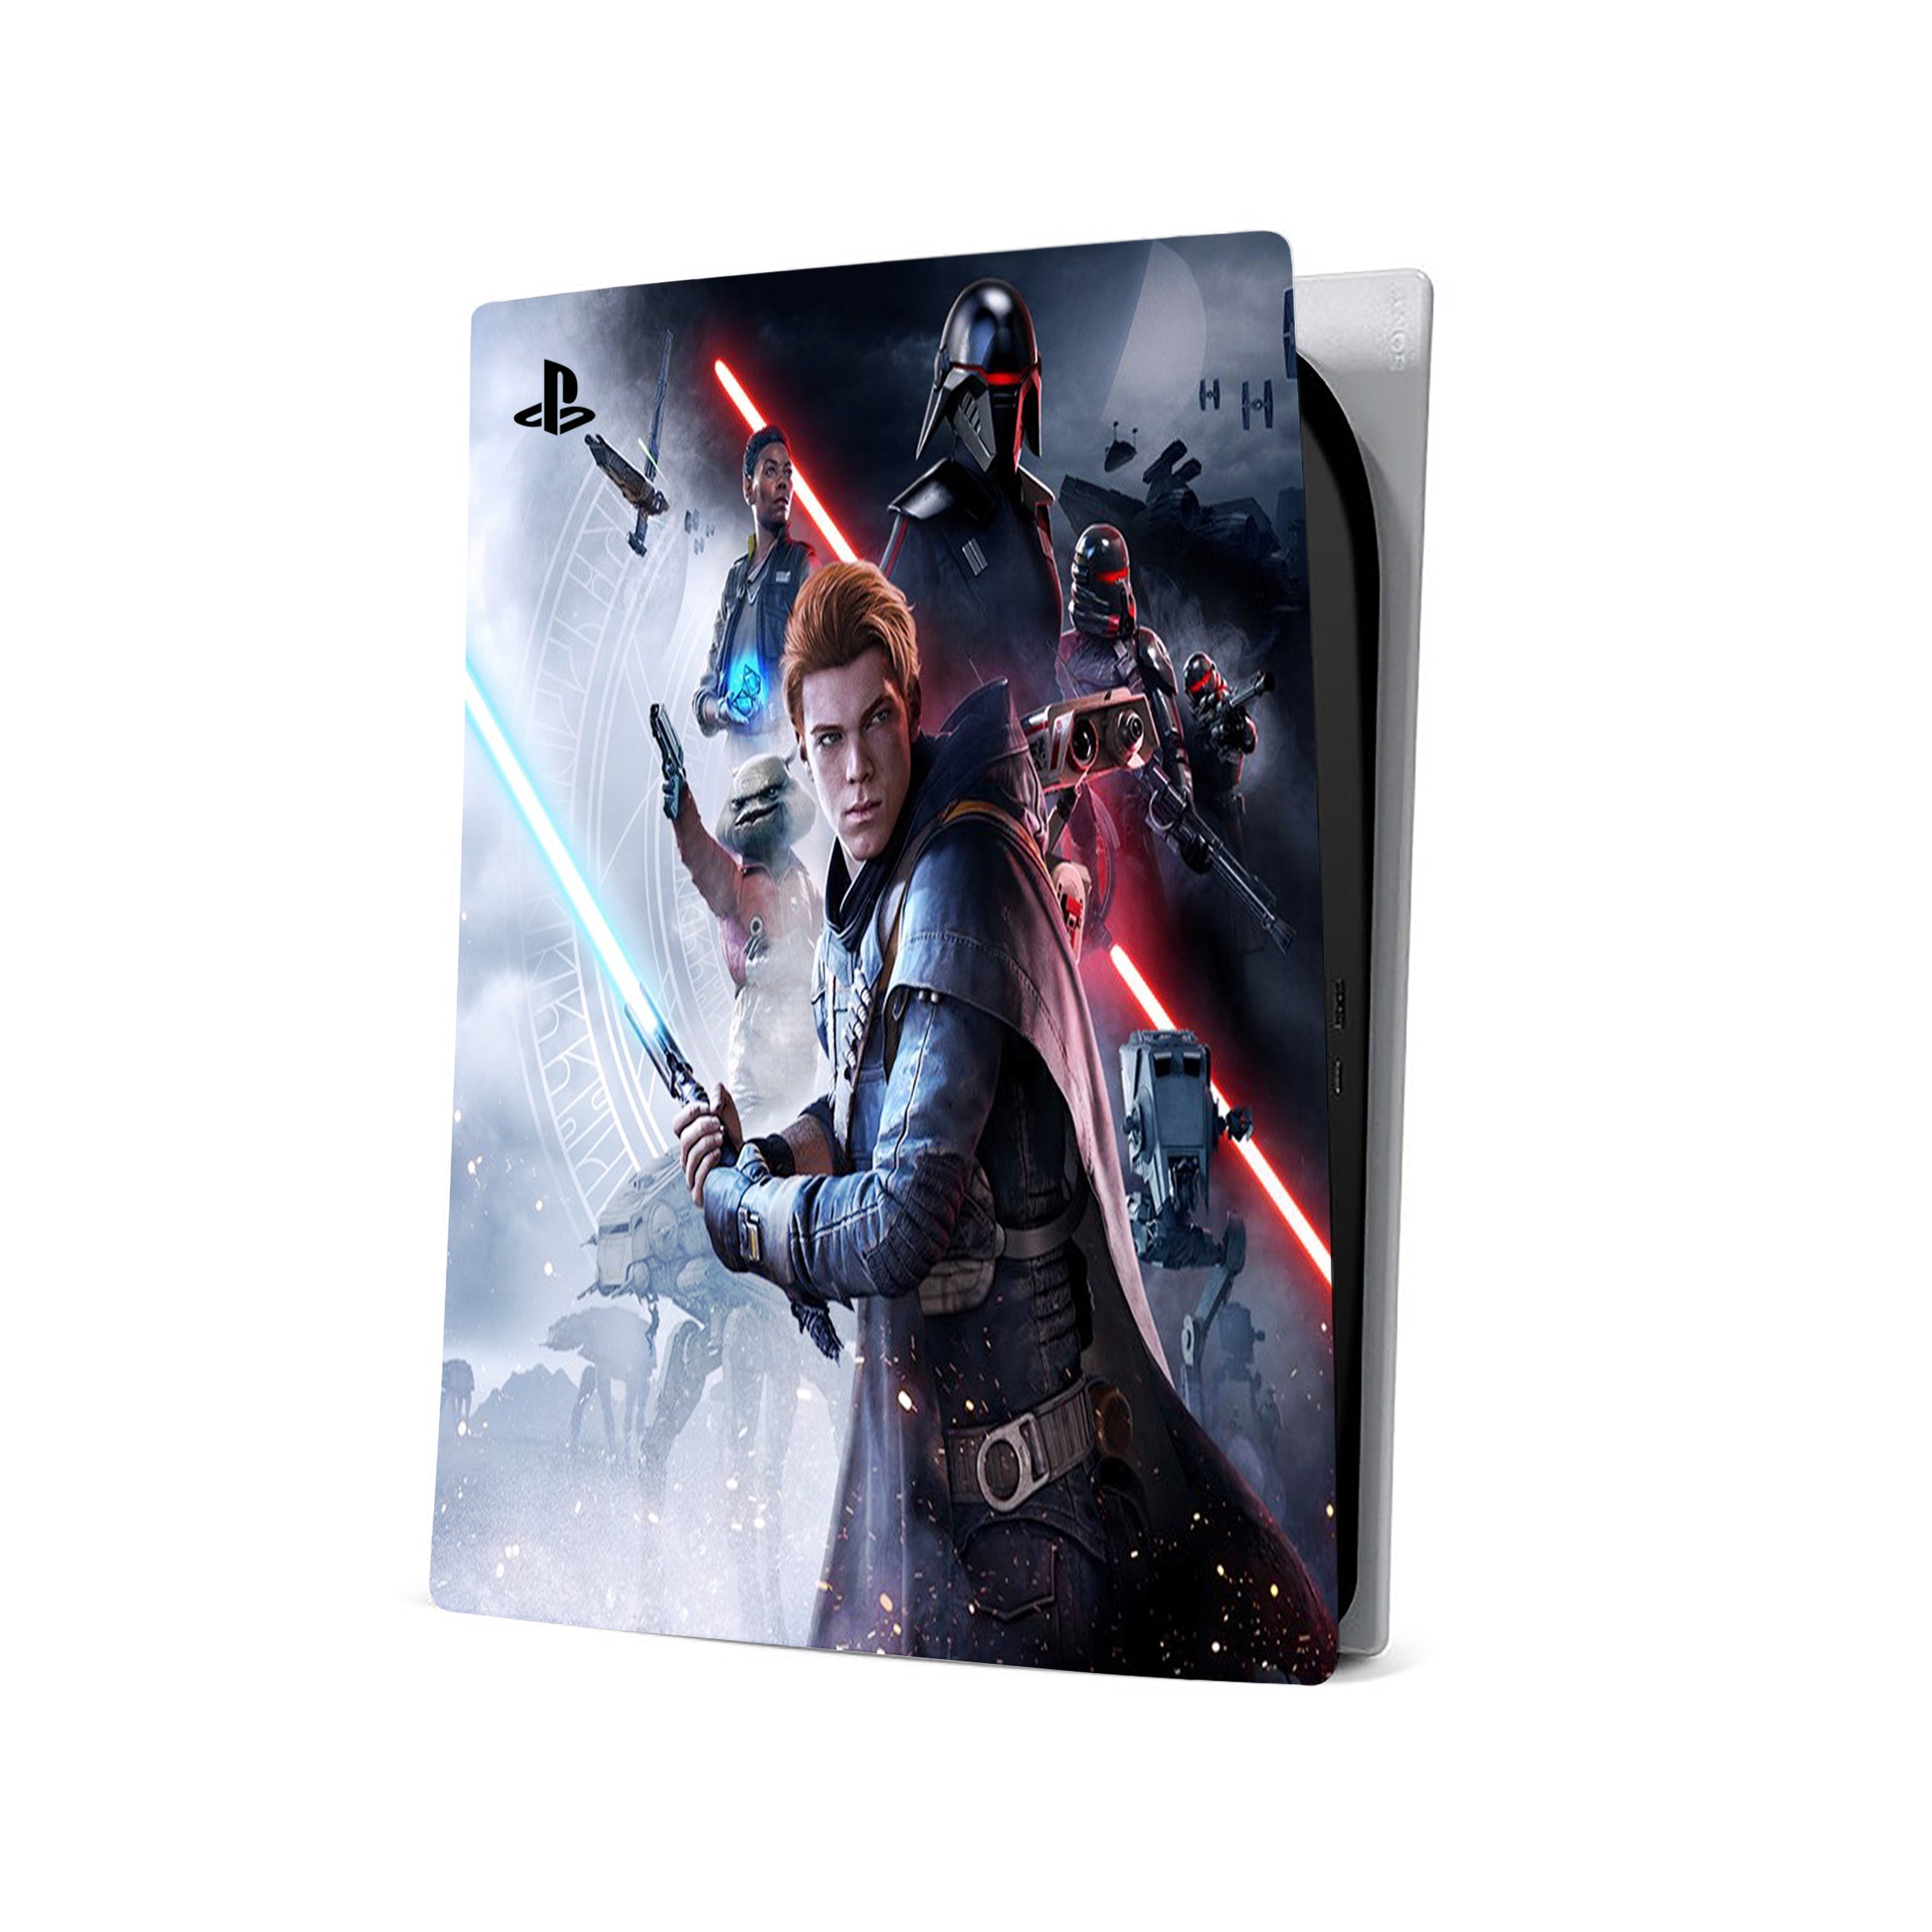 A video game skin featuring a Star Wars Jedi Fallen Order design for the PS5.